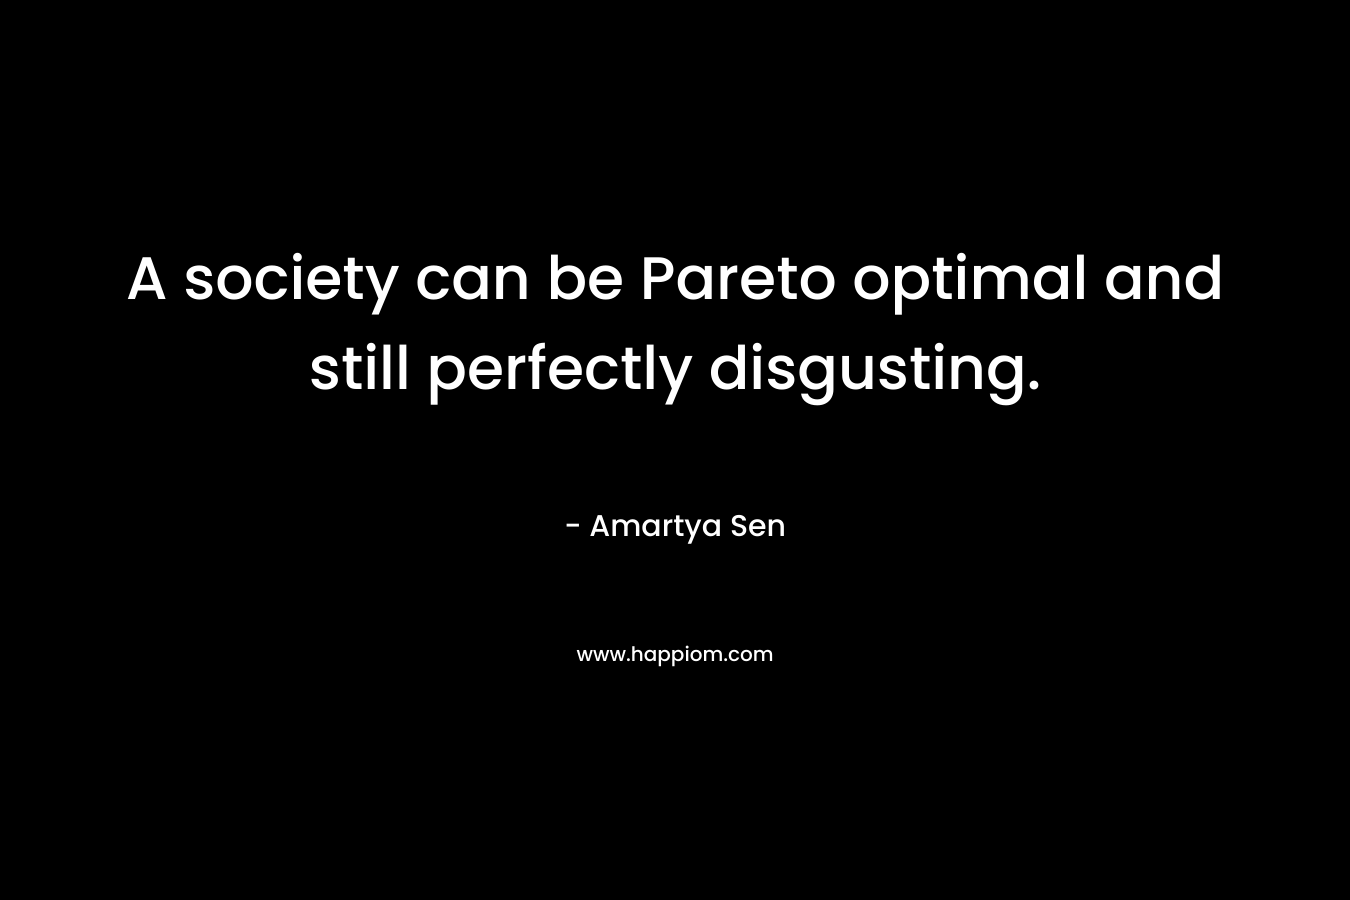 A society can be Pareto optimal and still perfectly disgusting.